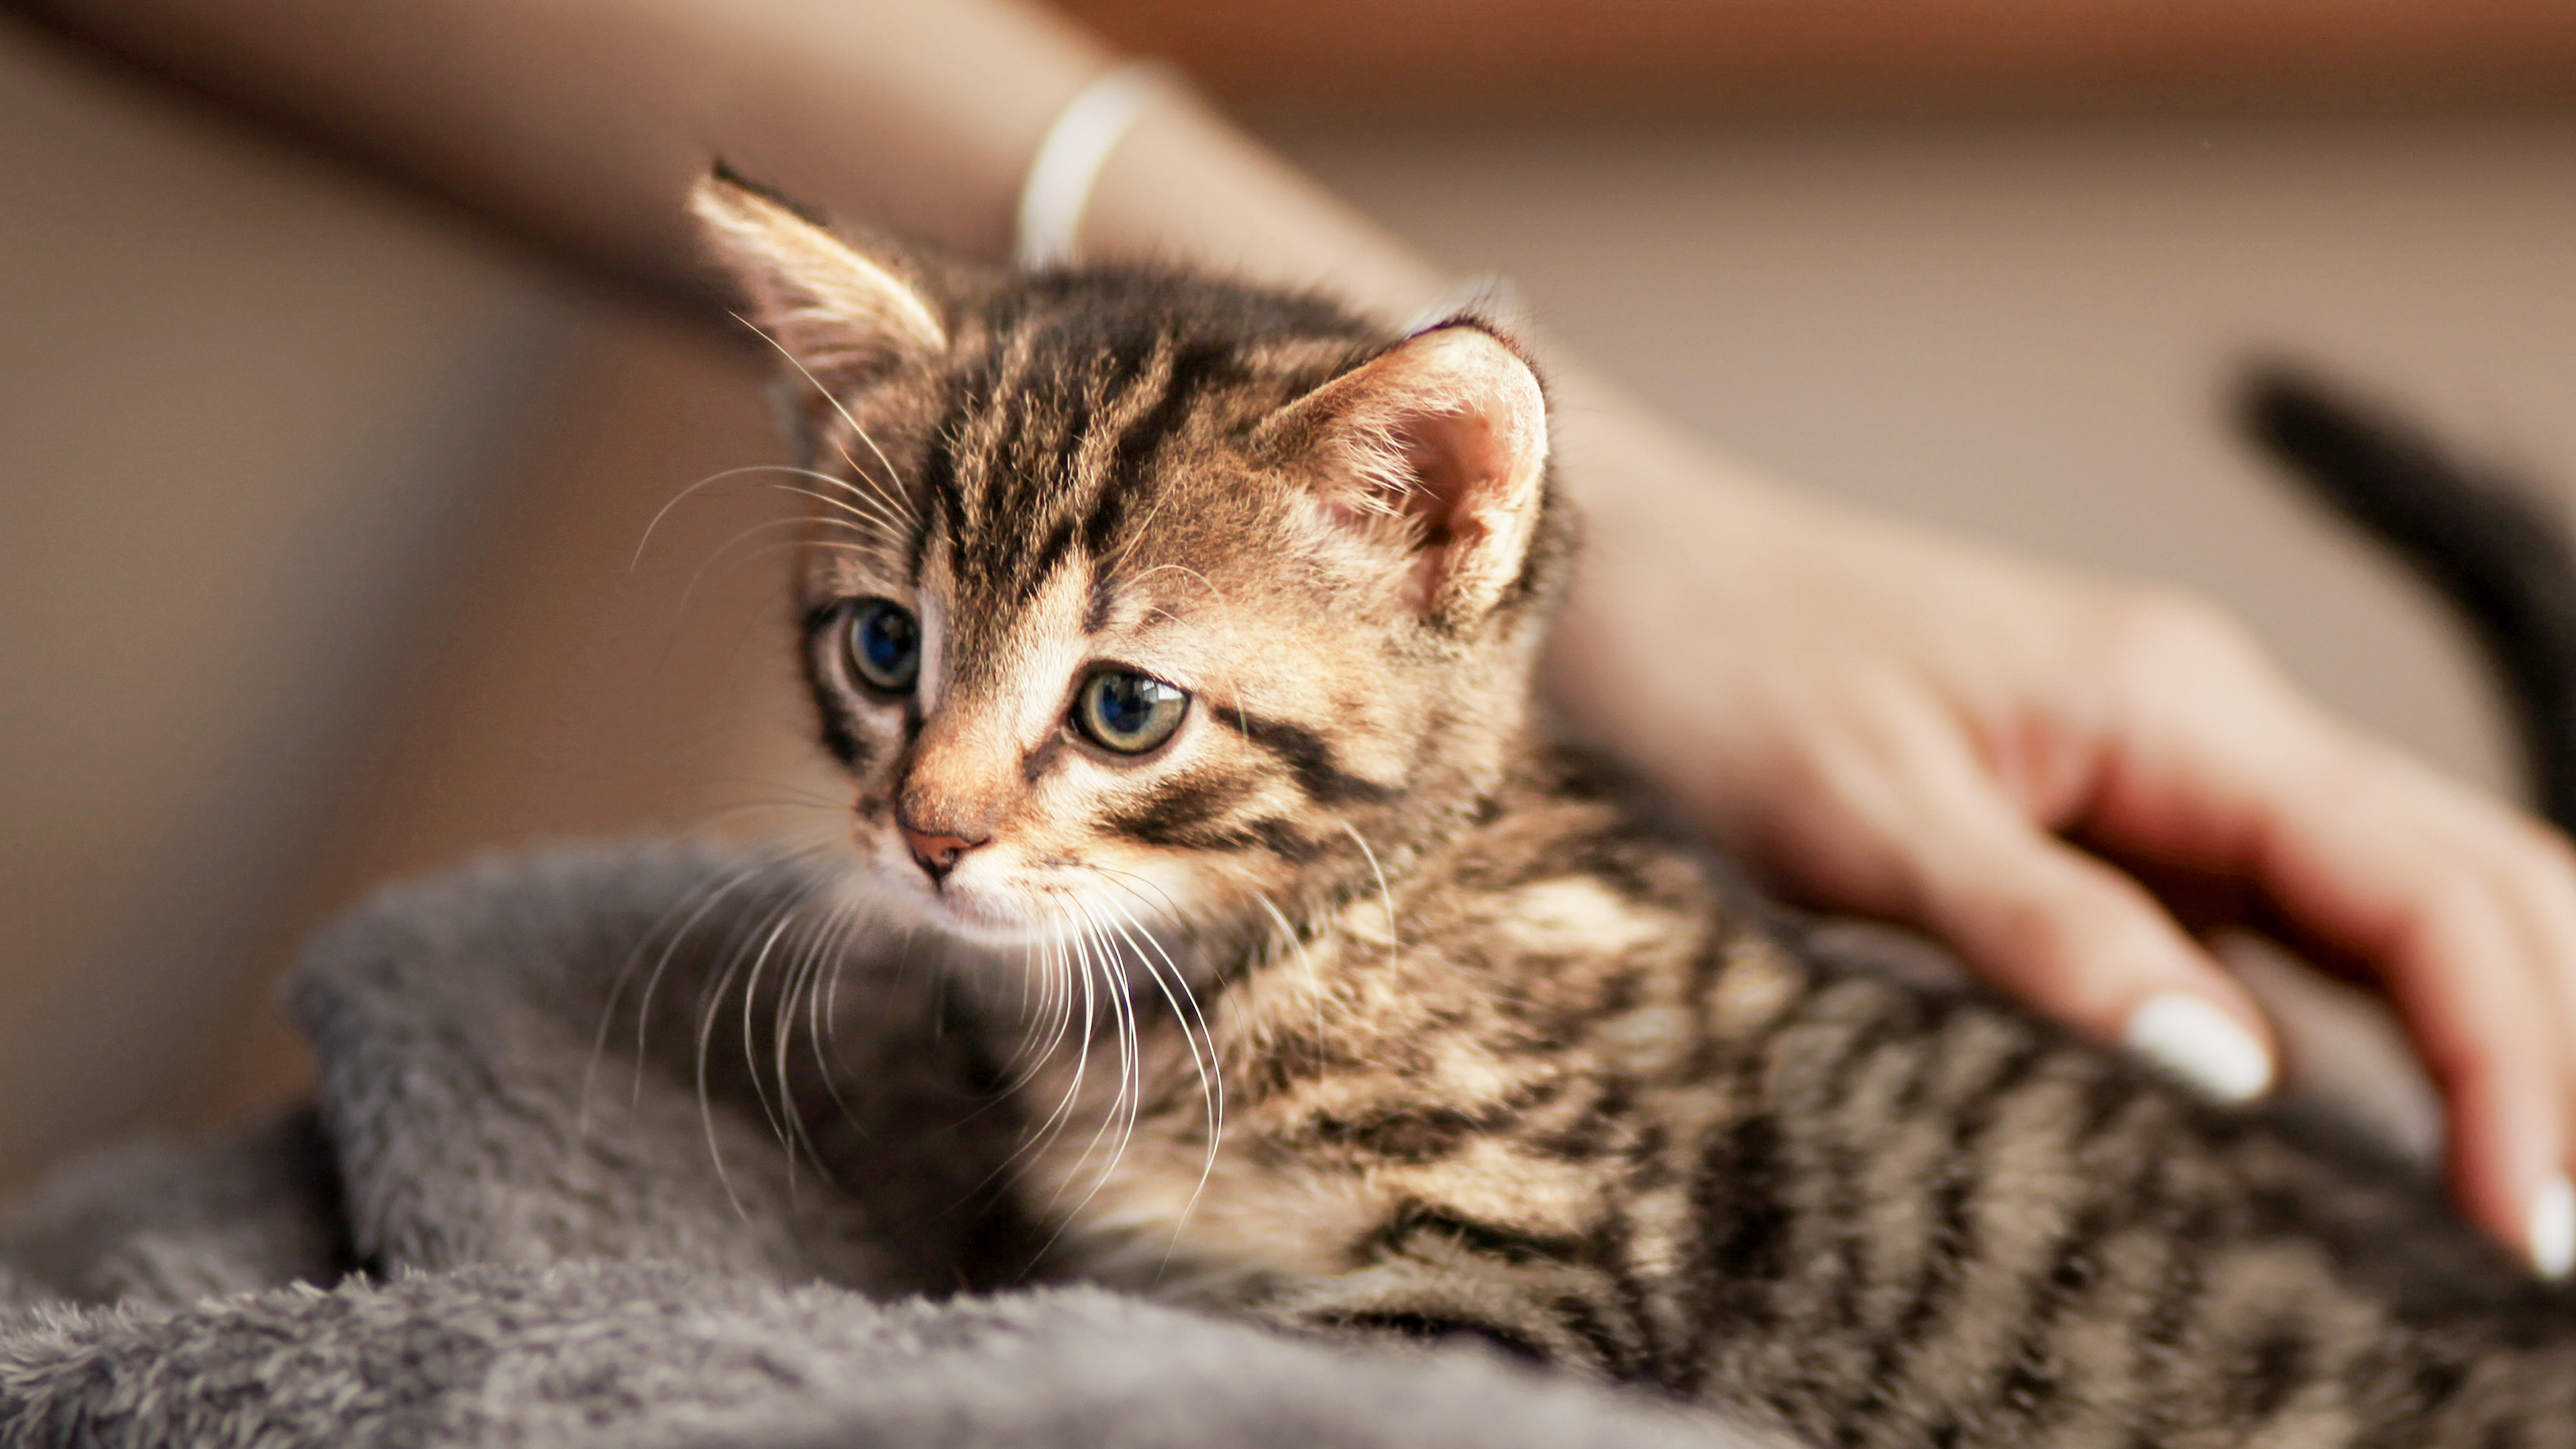 Bengal kitten sitting on a grey blanket being stroked by owner